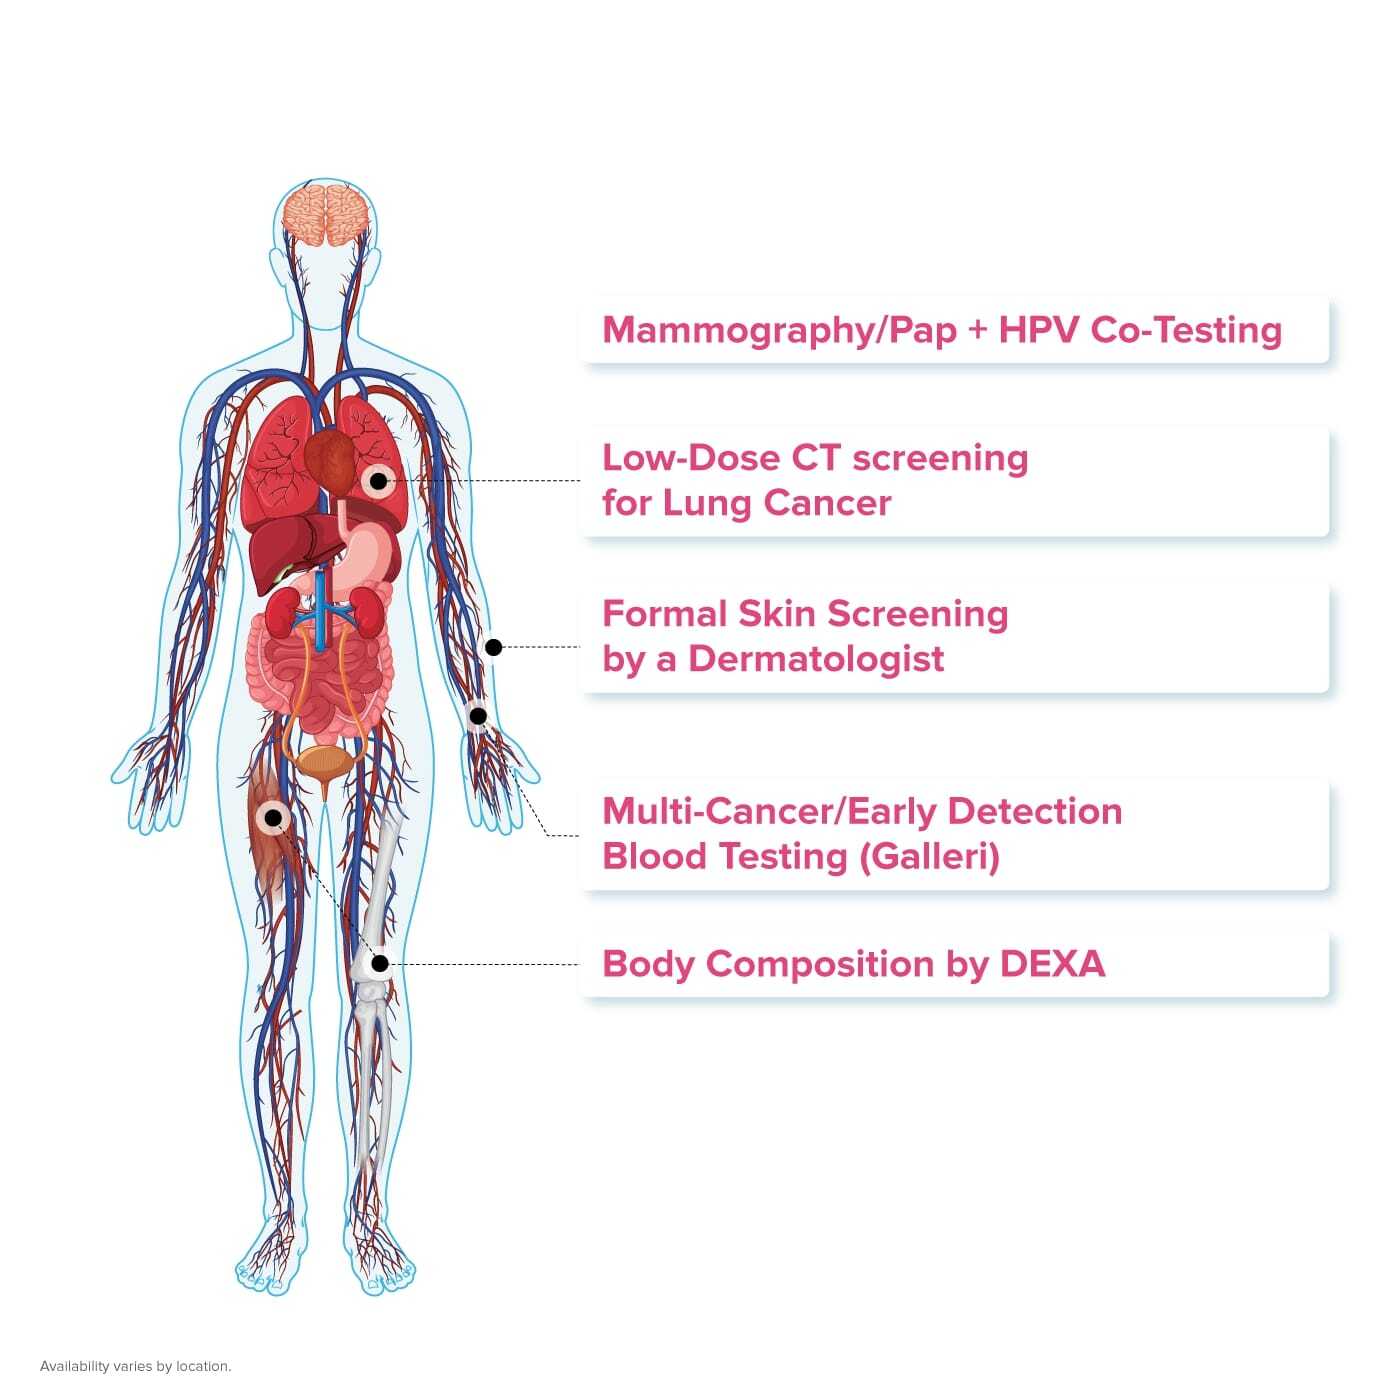 Image of human body depicting tests available for cancer during PartnerMD executive physicals